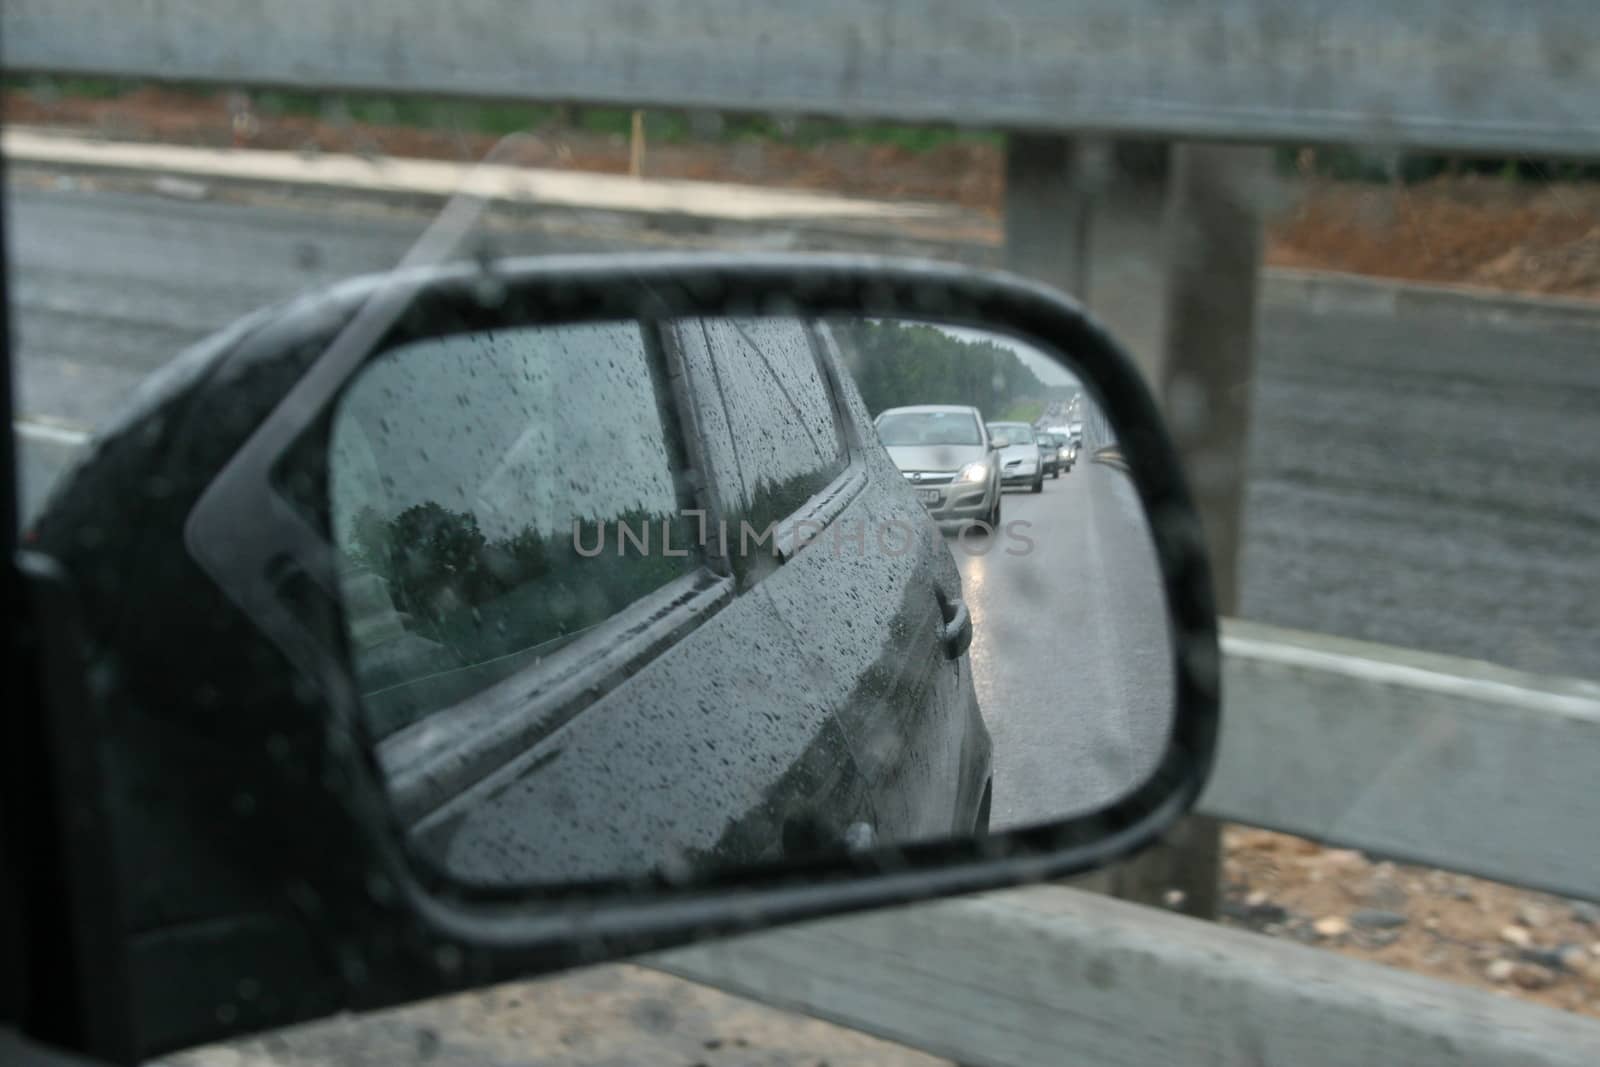 All machines in the side mirror of a car, rainy day, Russia